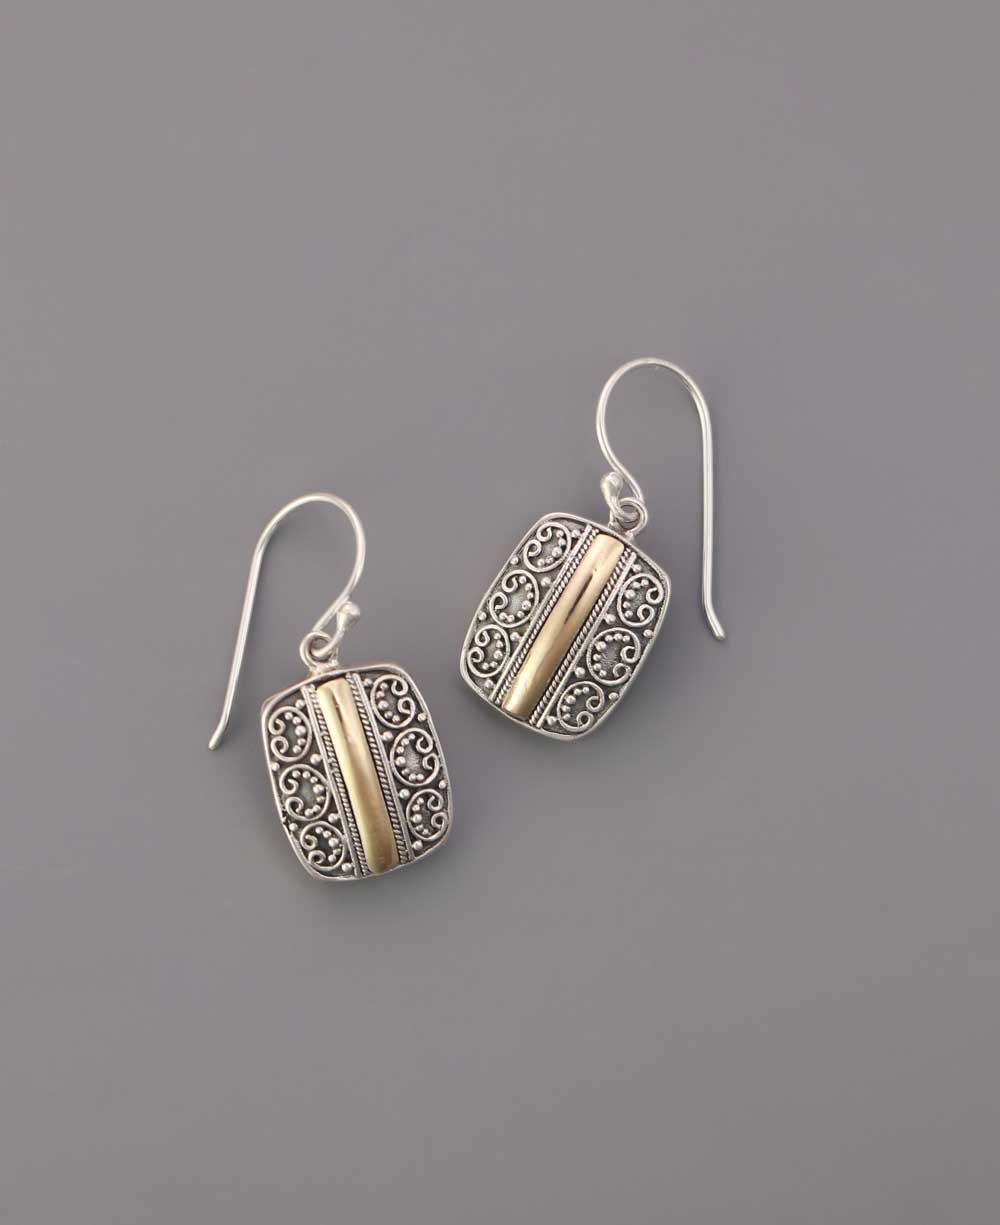 Sterling silver filigree earrings with gold accents